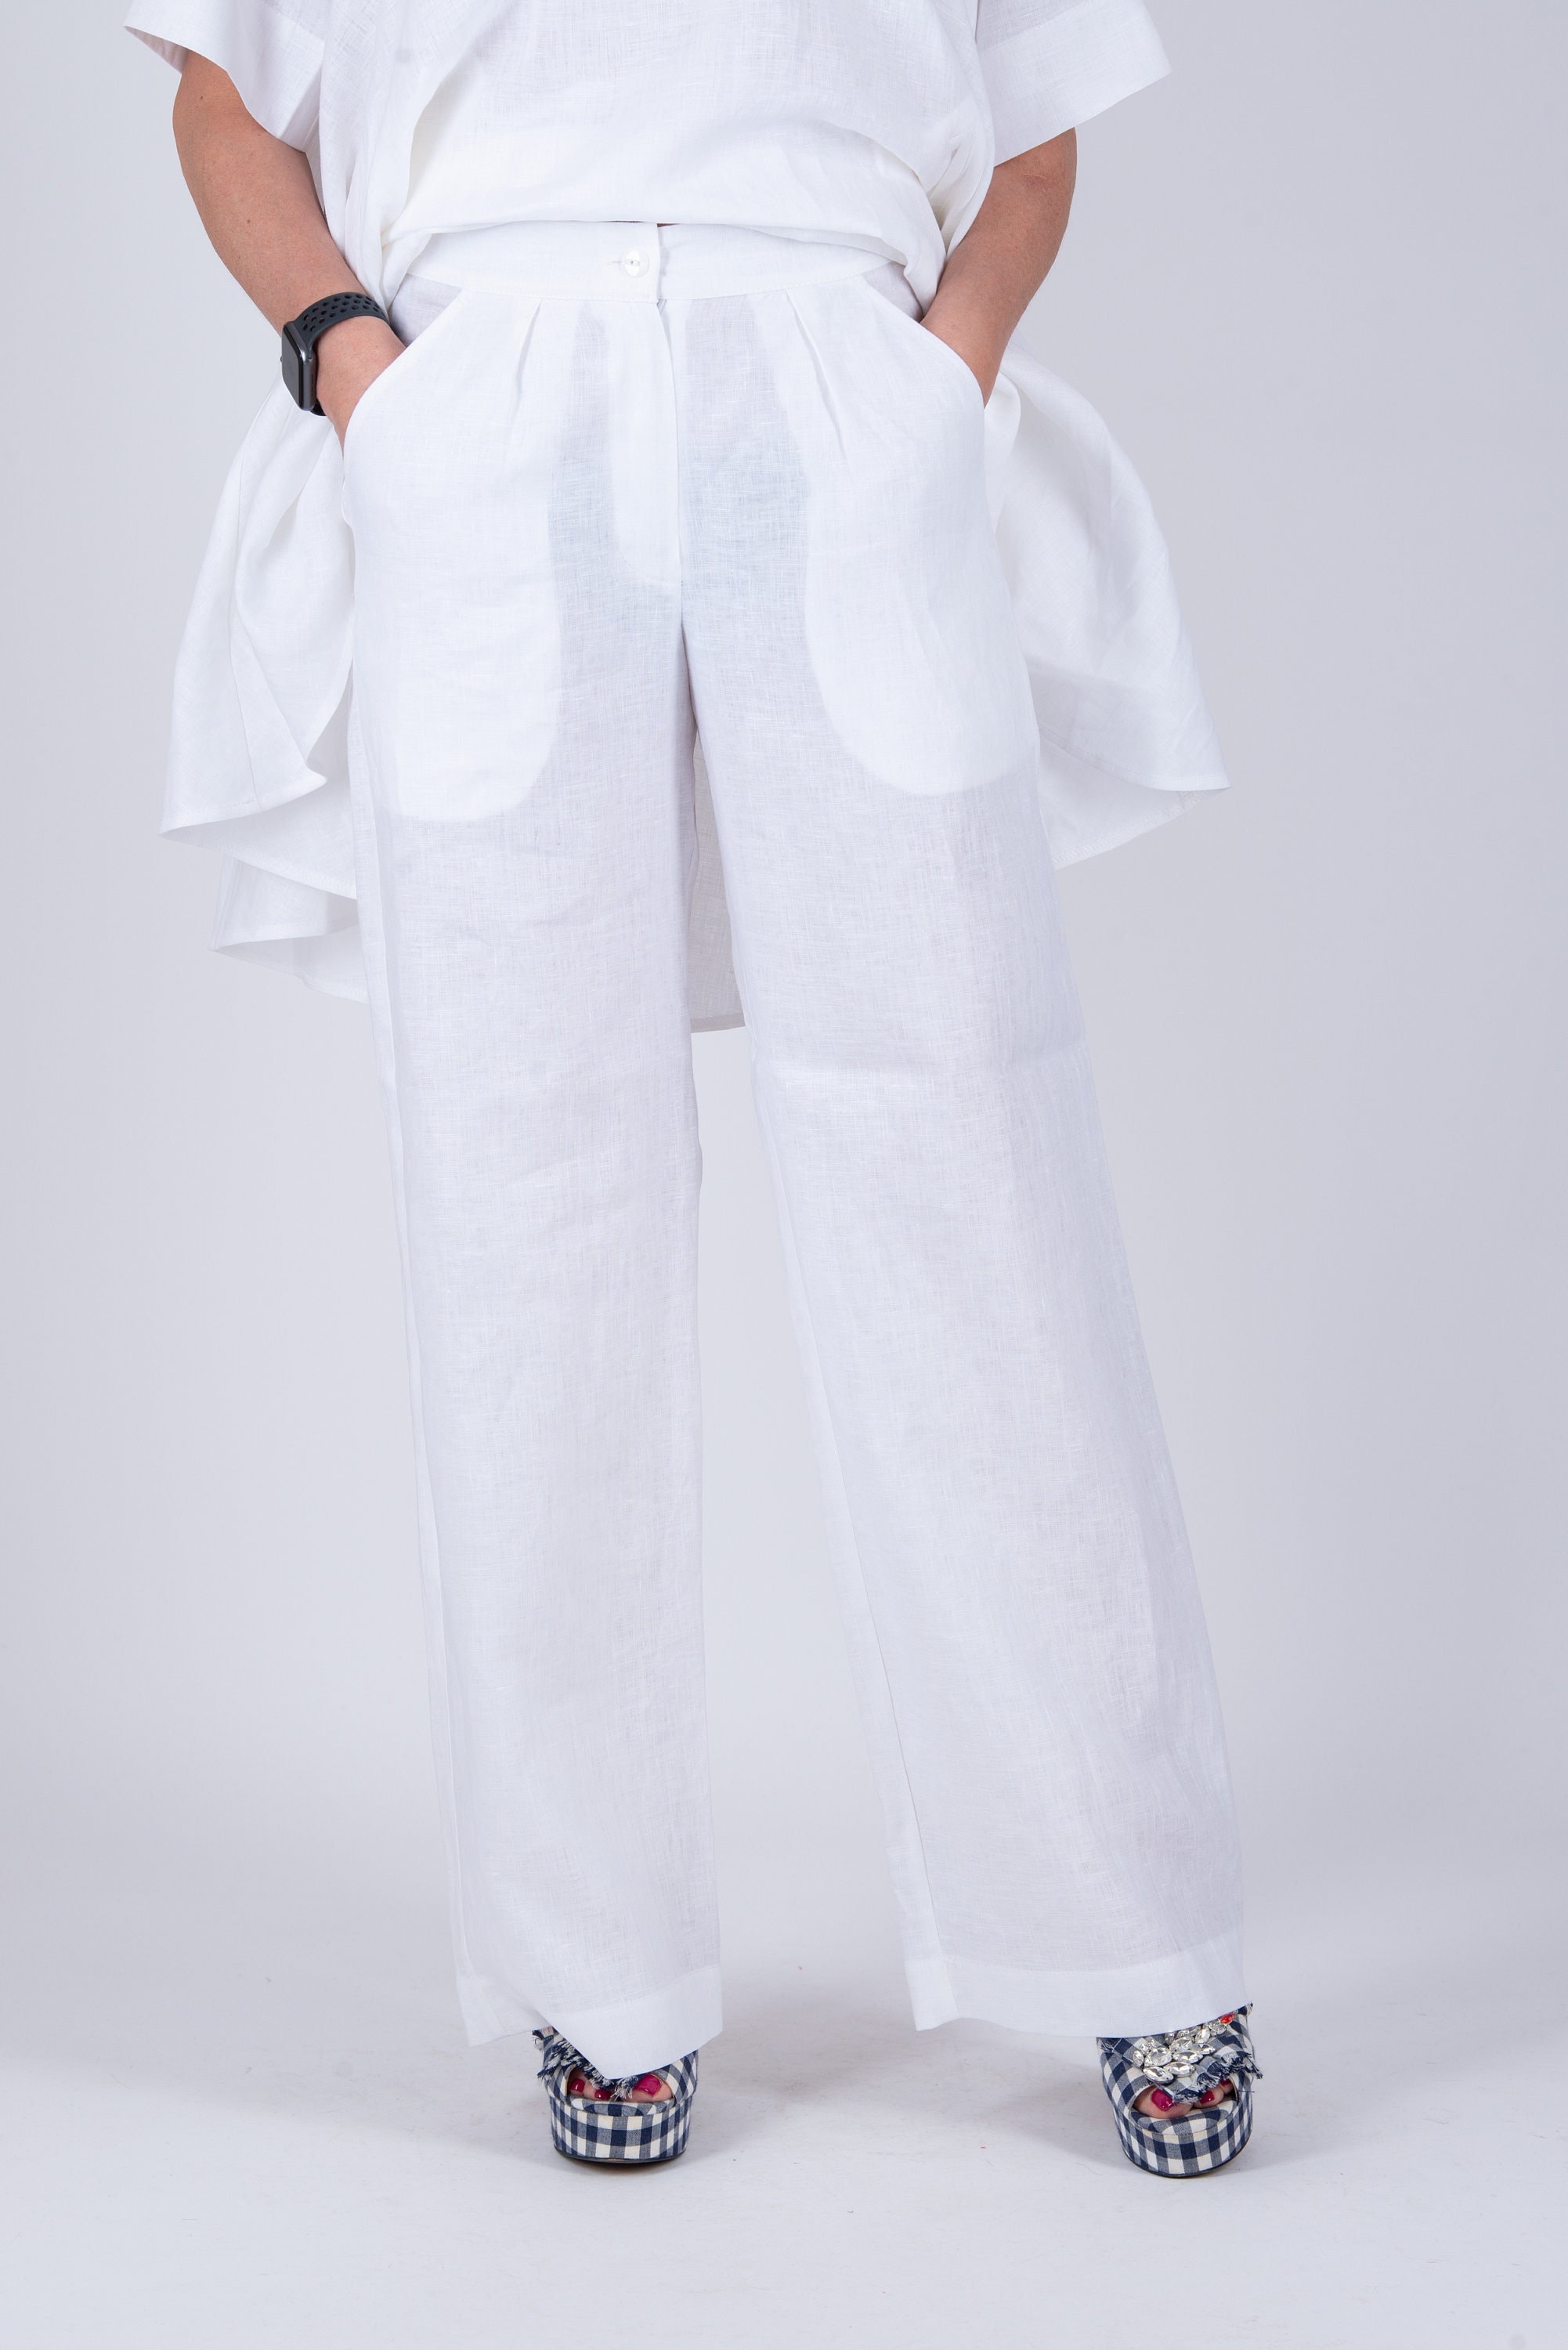 White Straight Linen Trousers Formal Linen Pants for Women picture